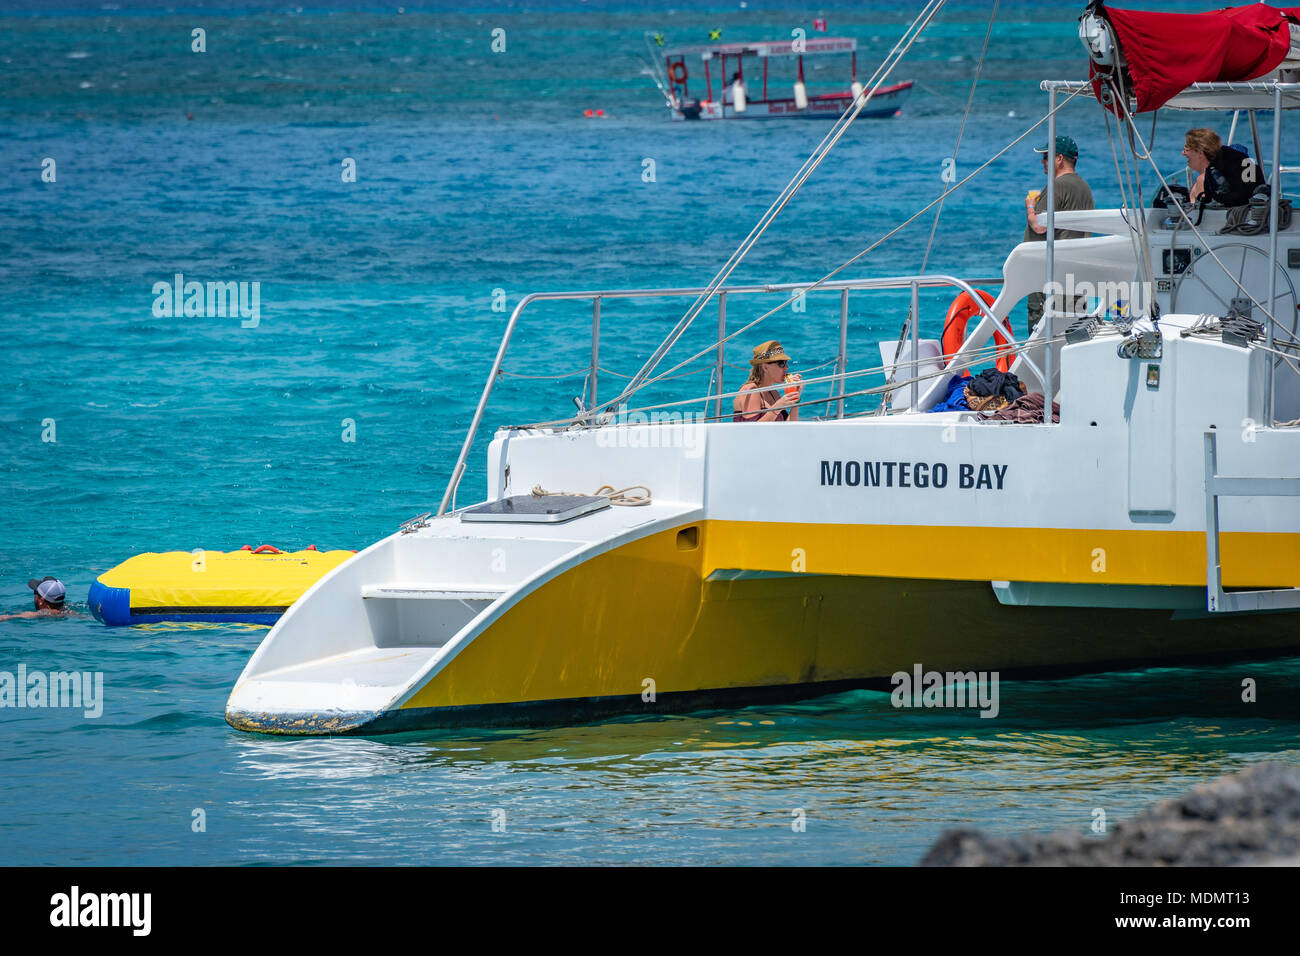 Montego Bay, Jamaica - March 20 2018: Tourists on a catamaran in Montego Bay. Stock Photo